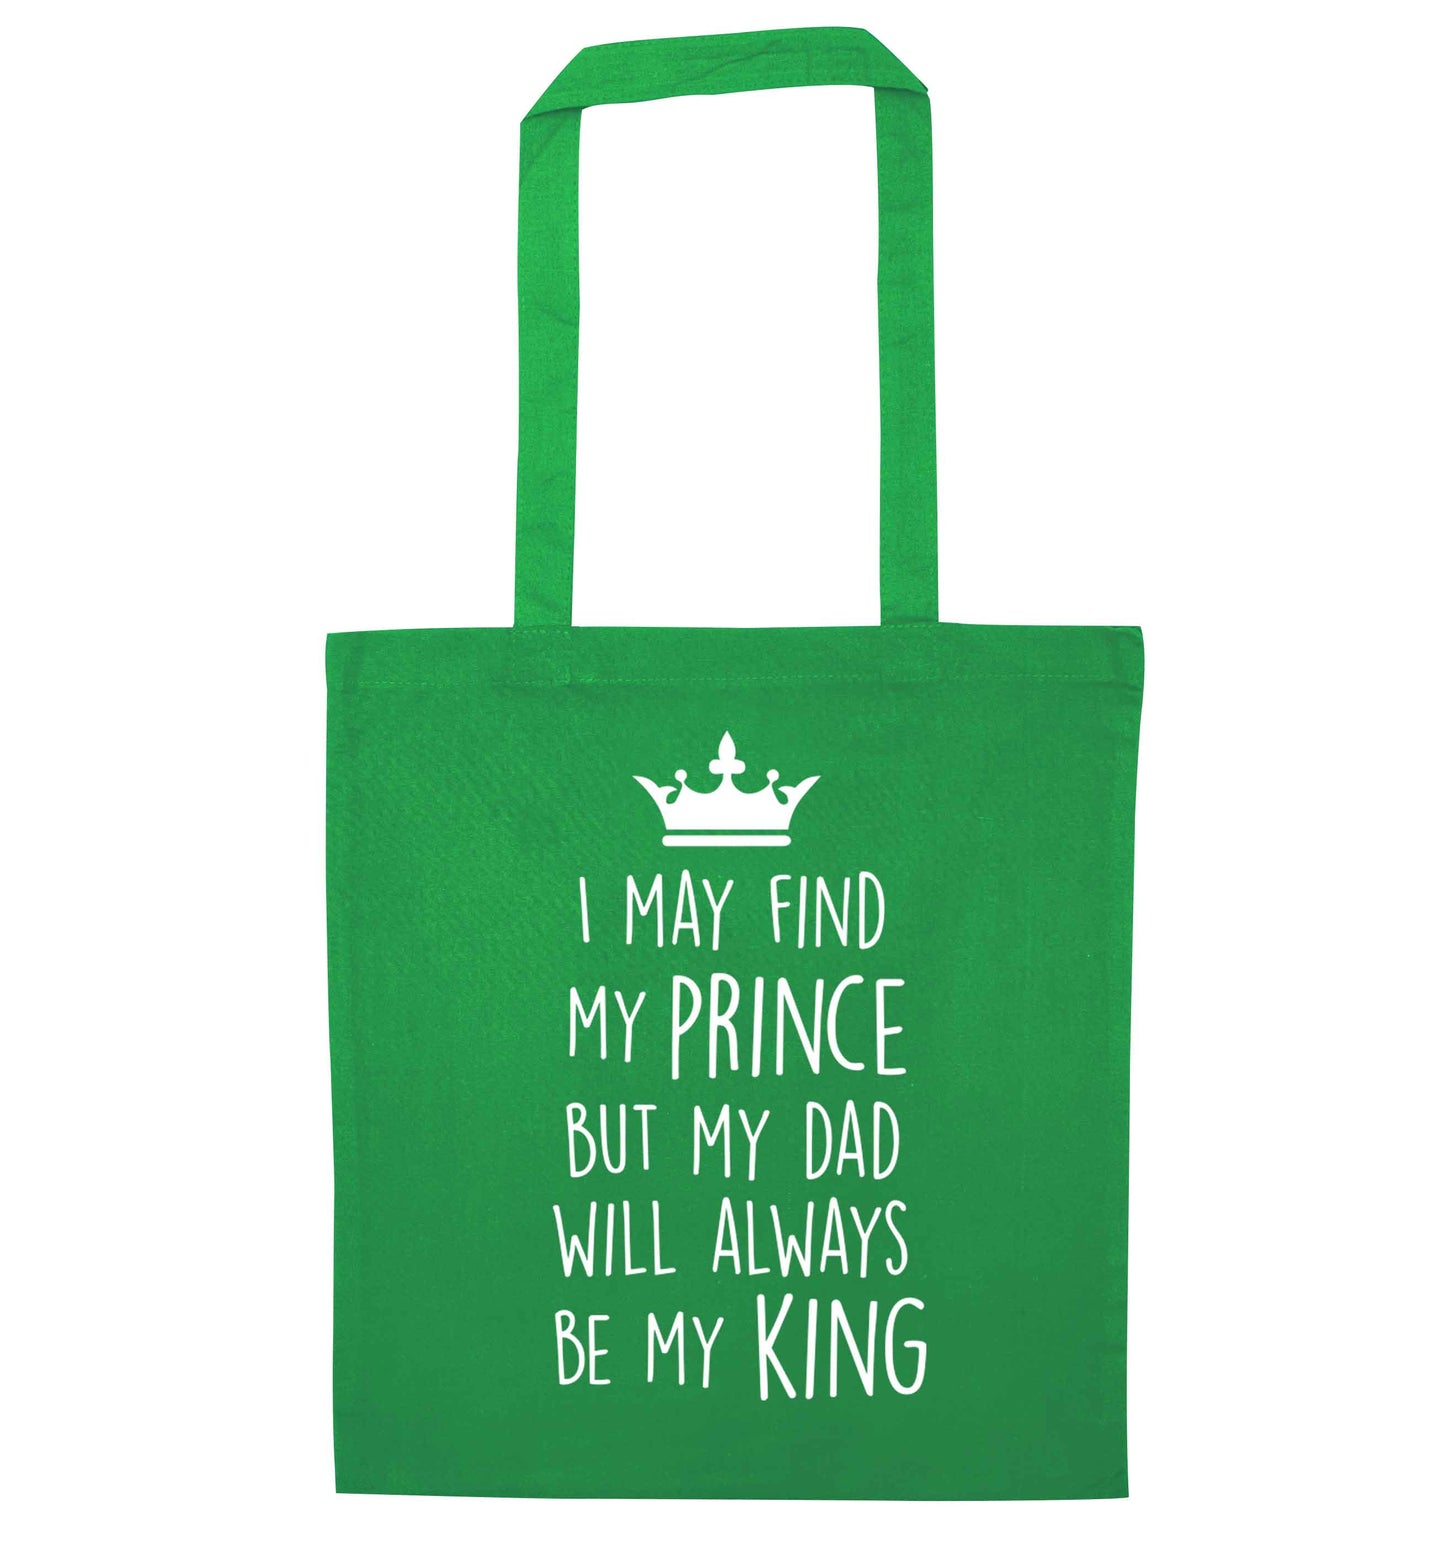 I may find my prince but my dad will always be my king green tote bag